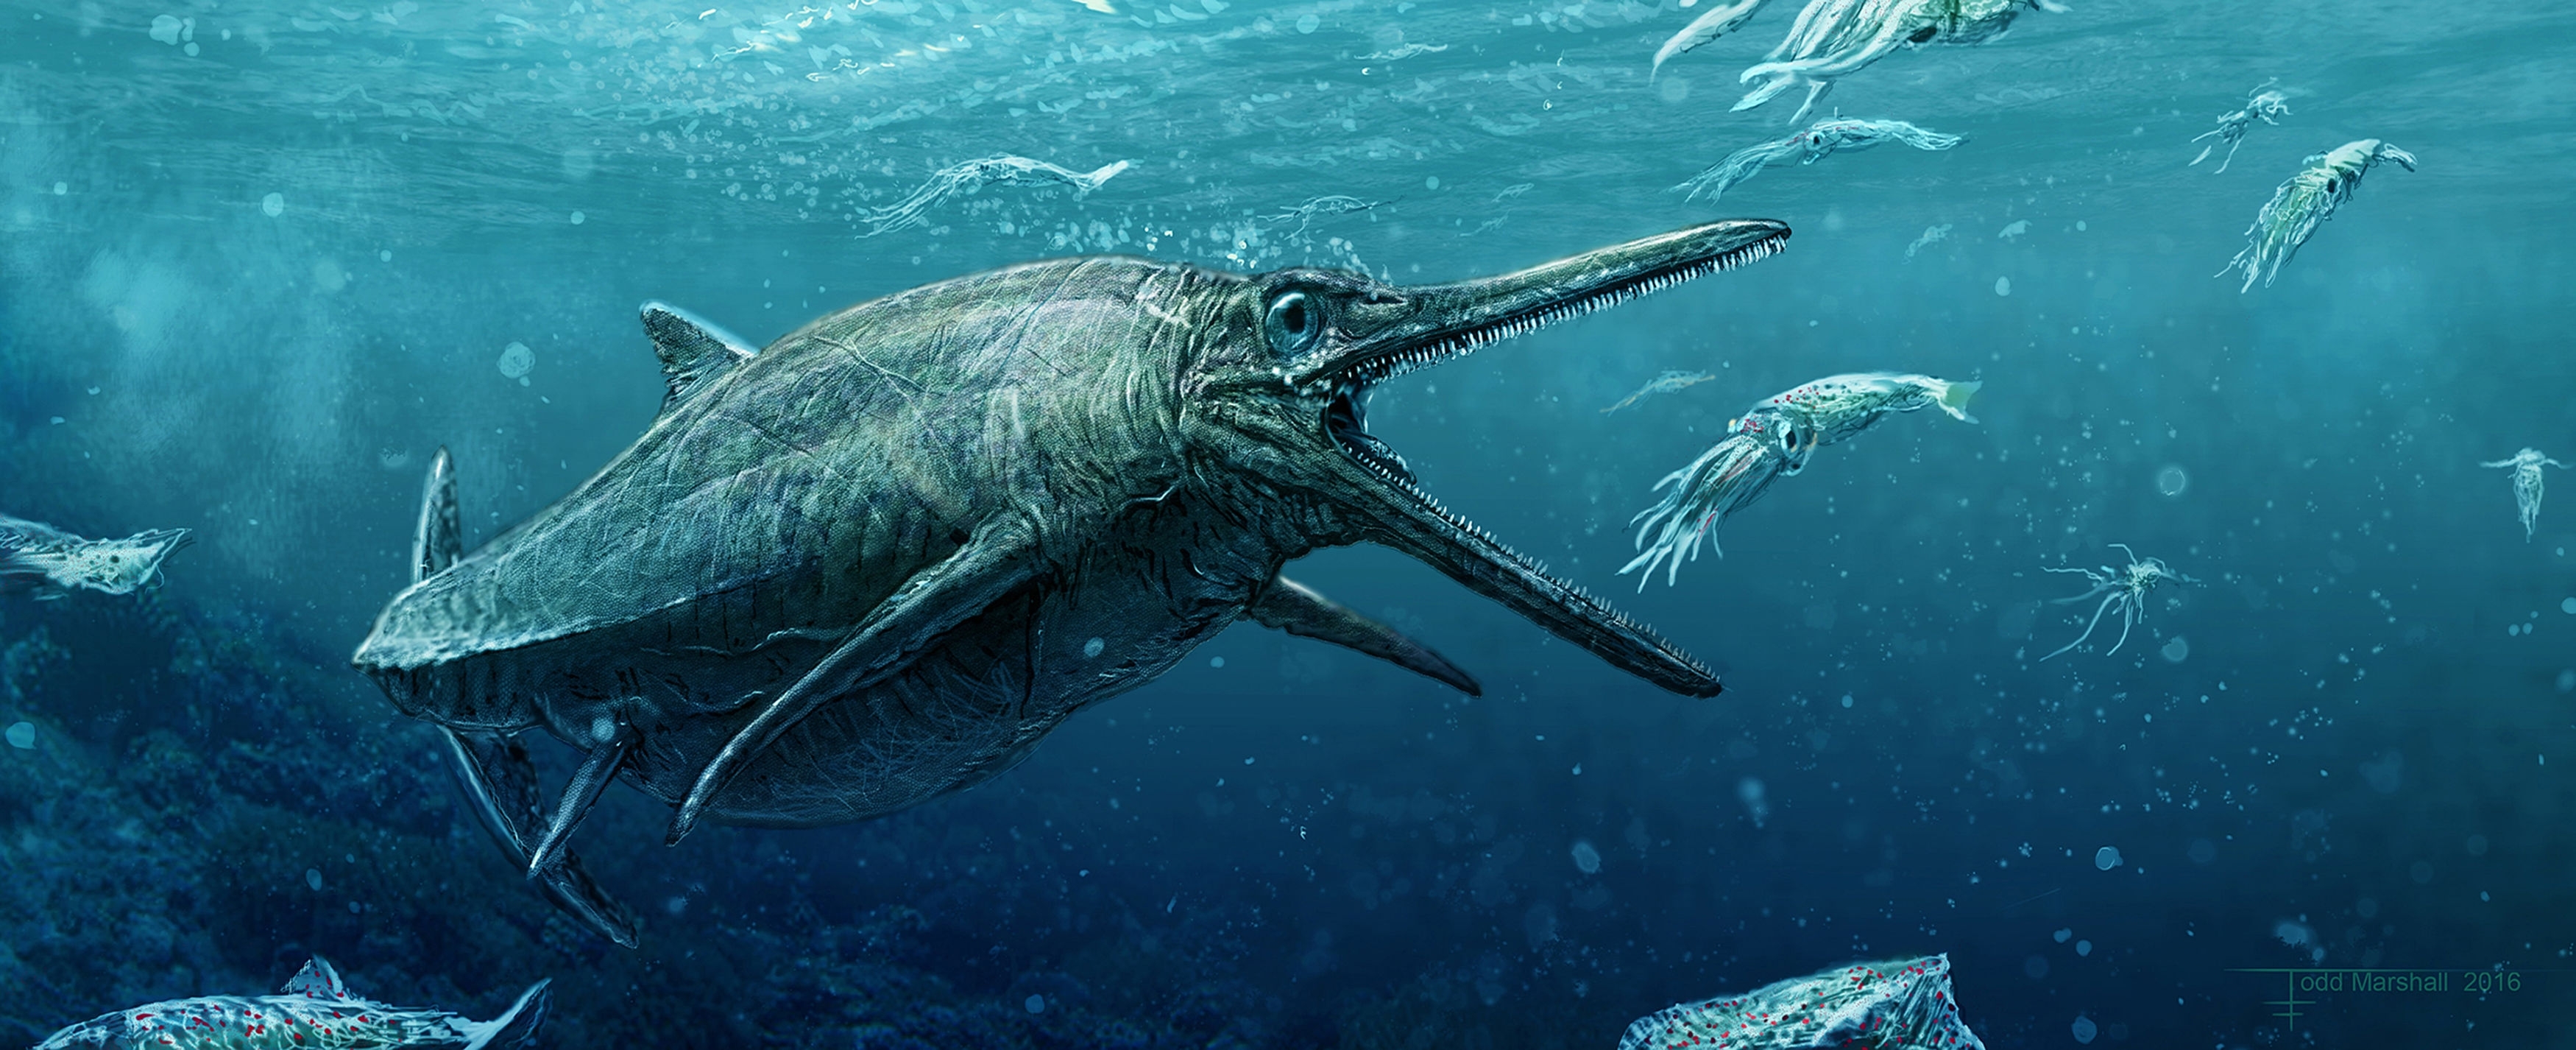 An artist's impression of the Storr Lochs Monster, a predator that ruled the seas 170 million years ago which has finally been unveiled by scientists half a century after it was discovered.